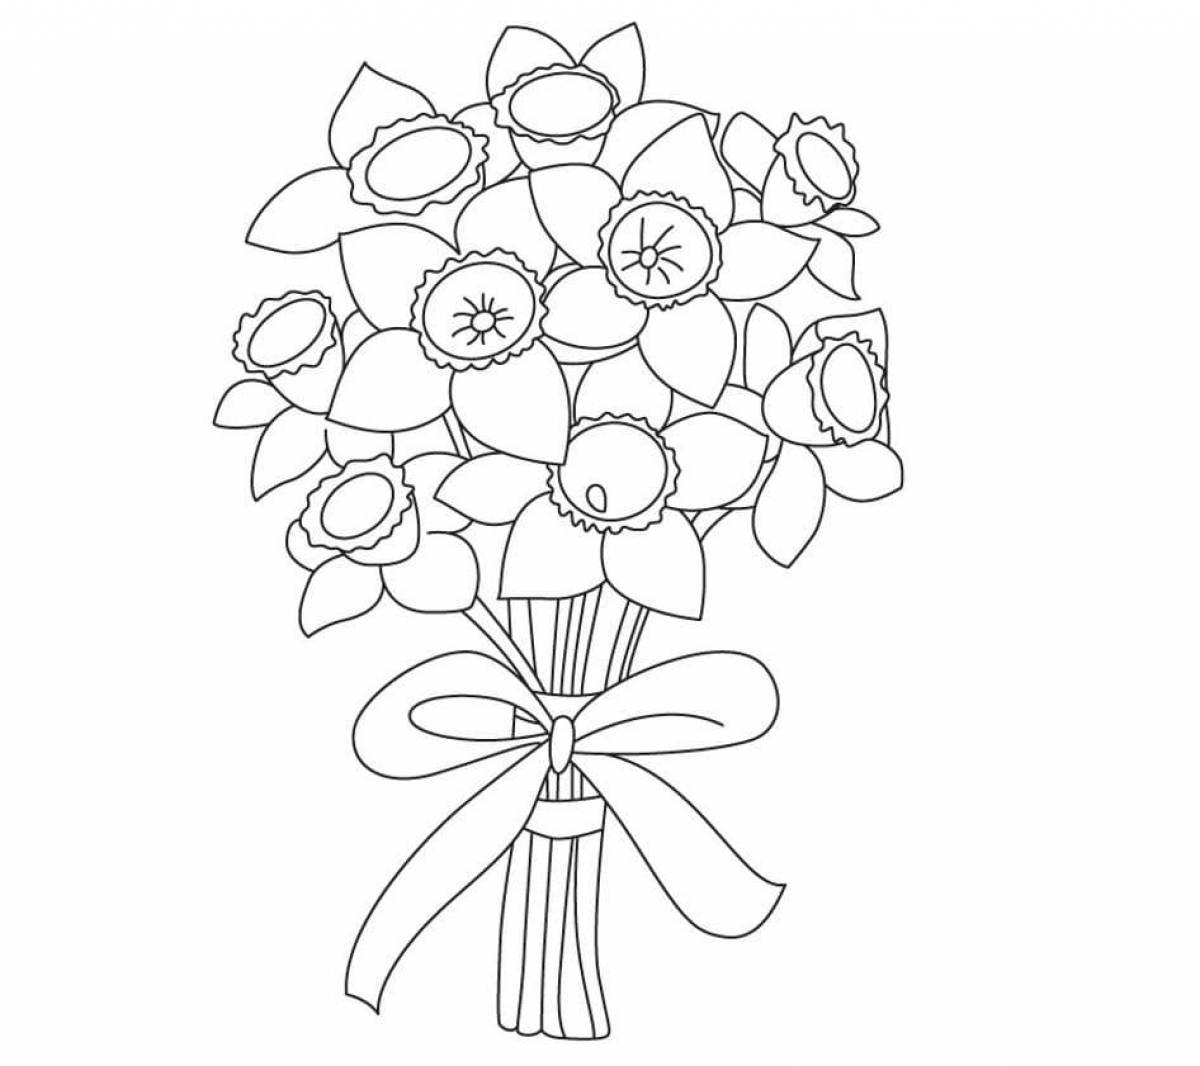 Glowing bouquet coloring page